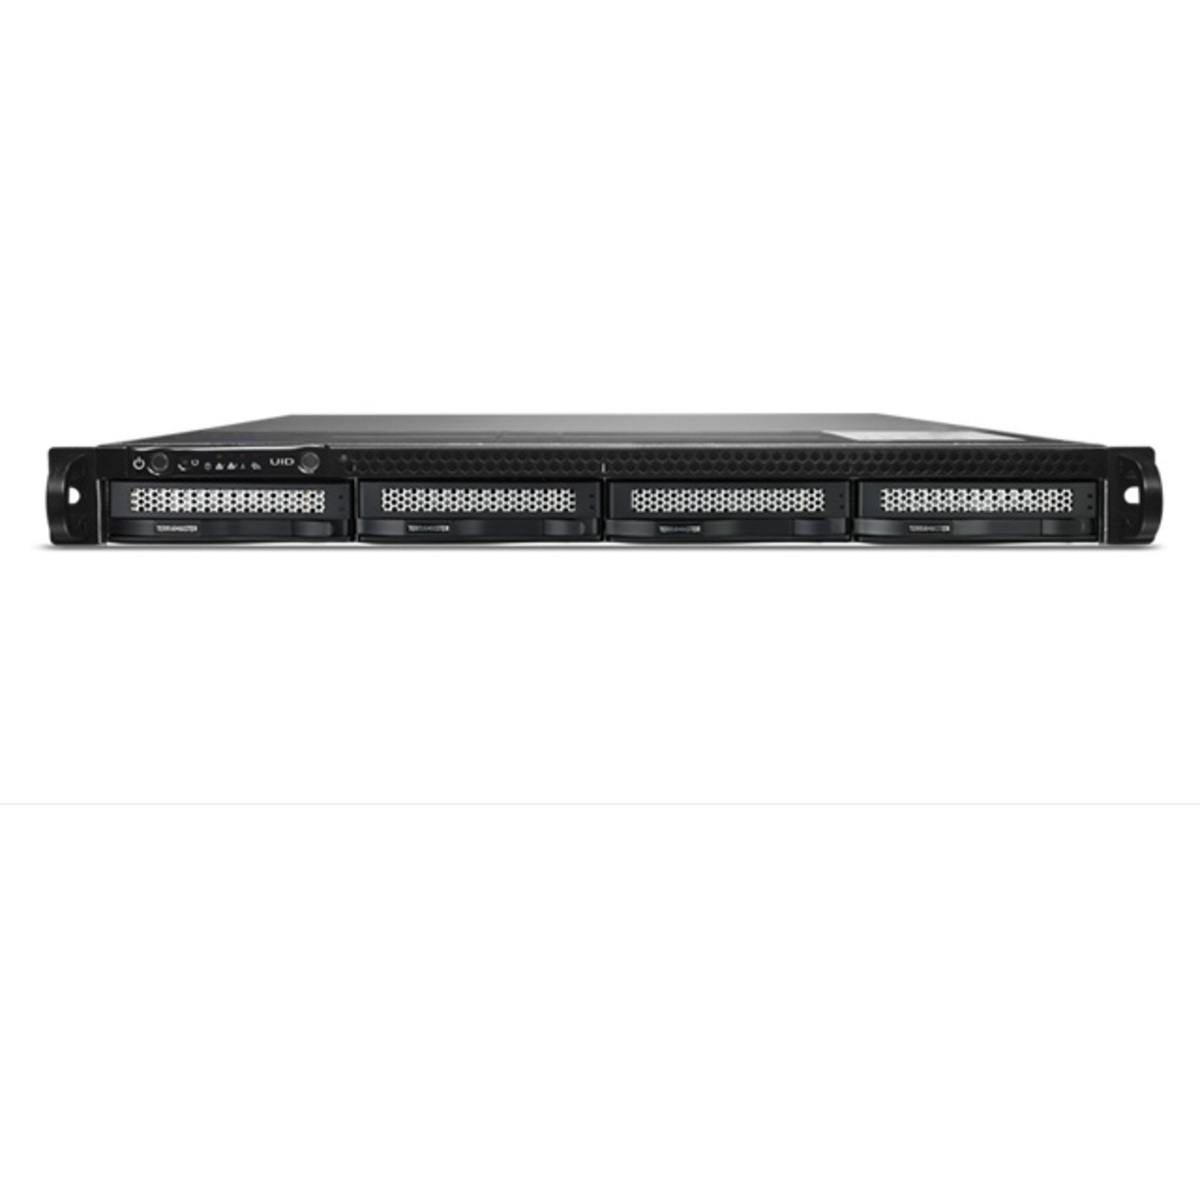 TerraMaster U4-111 18tb 4-Bay RackMount Multimedia / Power User / Business NAS - Network Attached Storage Device 3x6tb Western Digital Red Plus WD60EFPX 3.5 5640rpm SATA 6Gb/s HDD NAS Class Drives Installed - Burn-In Tested U4-111